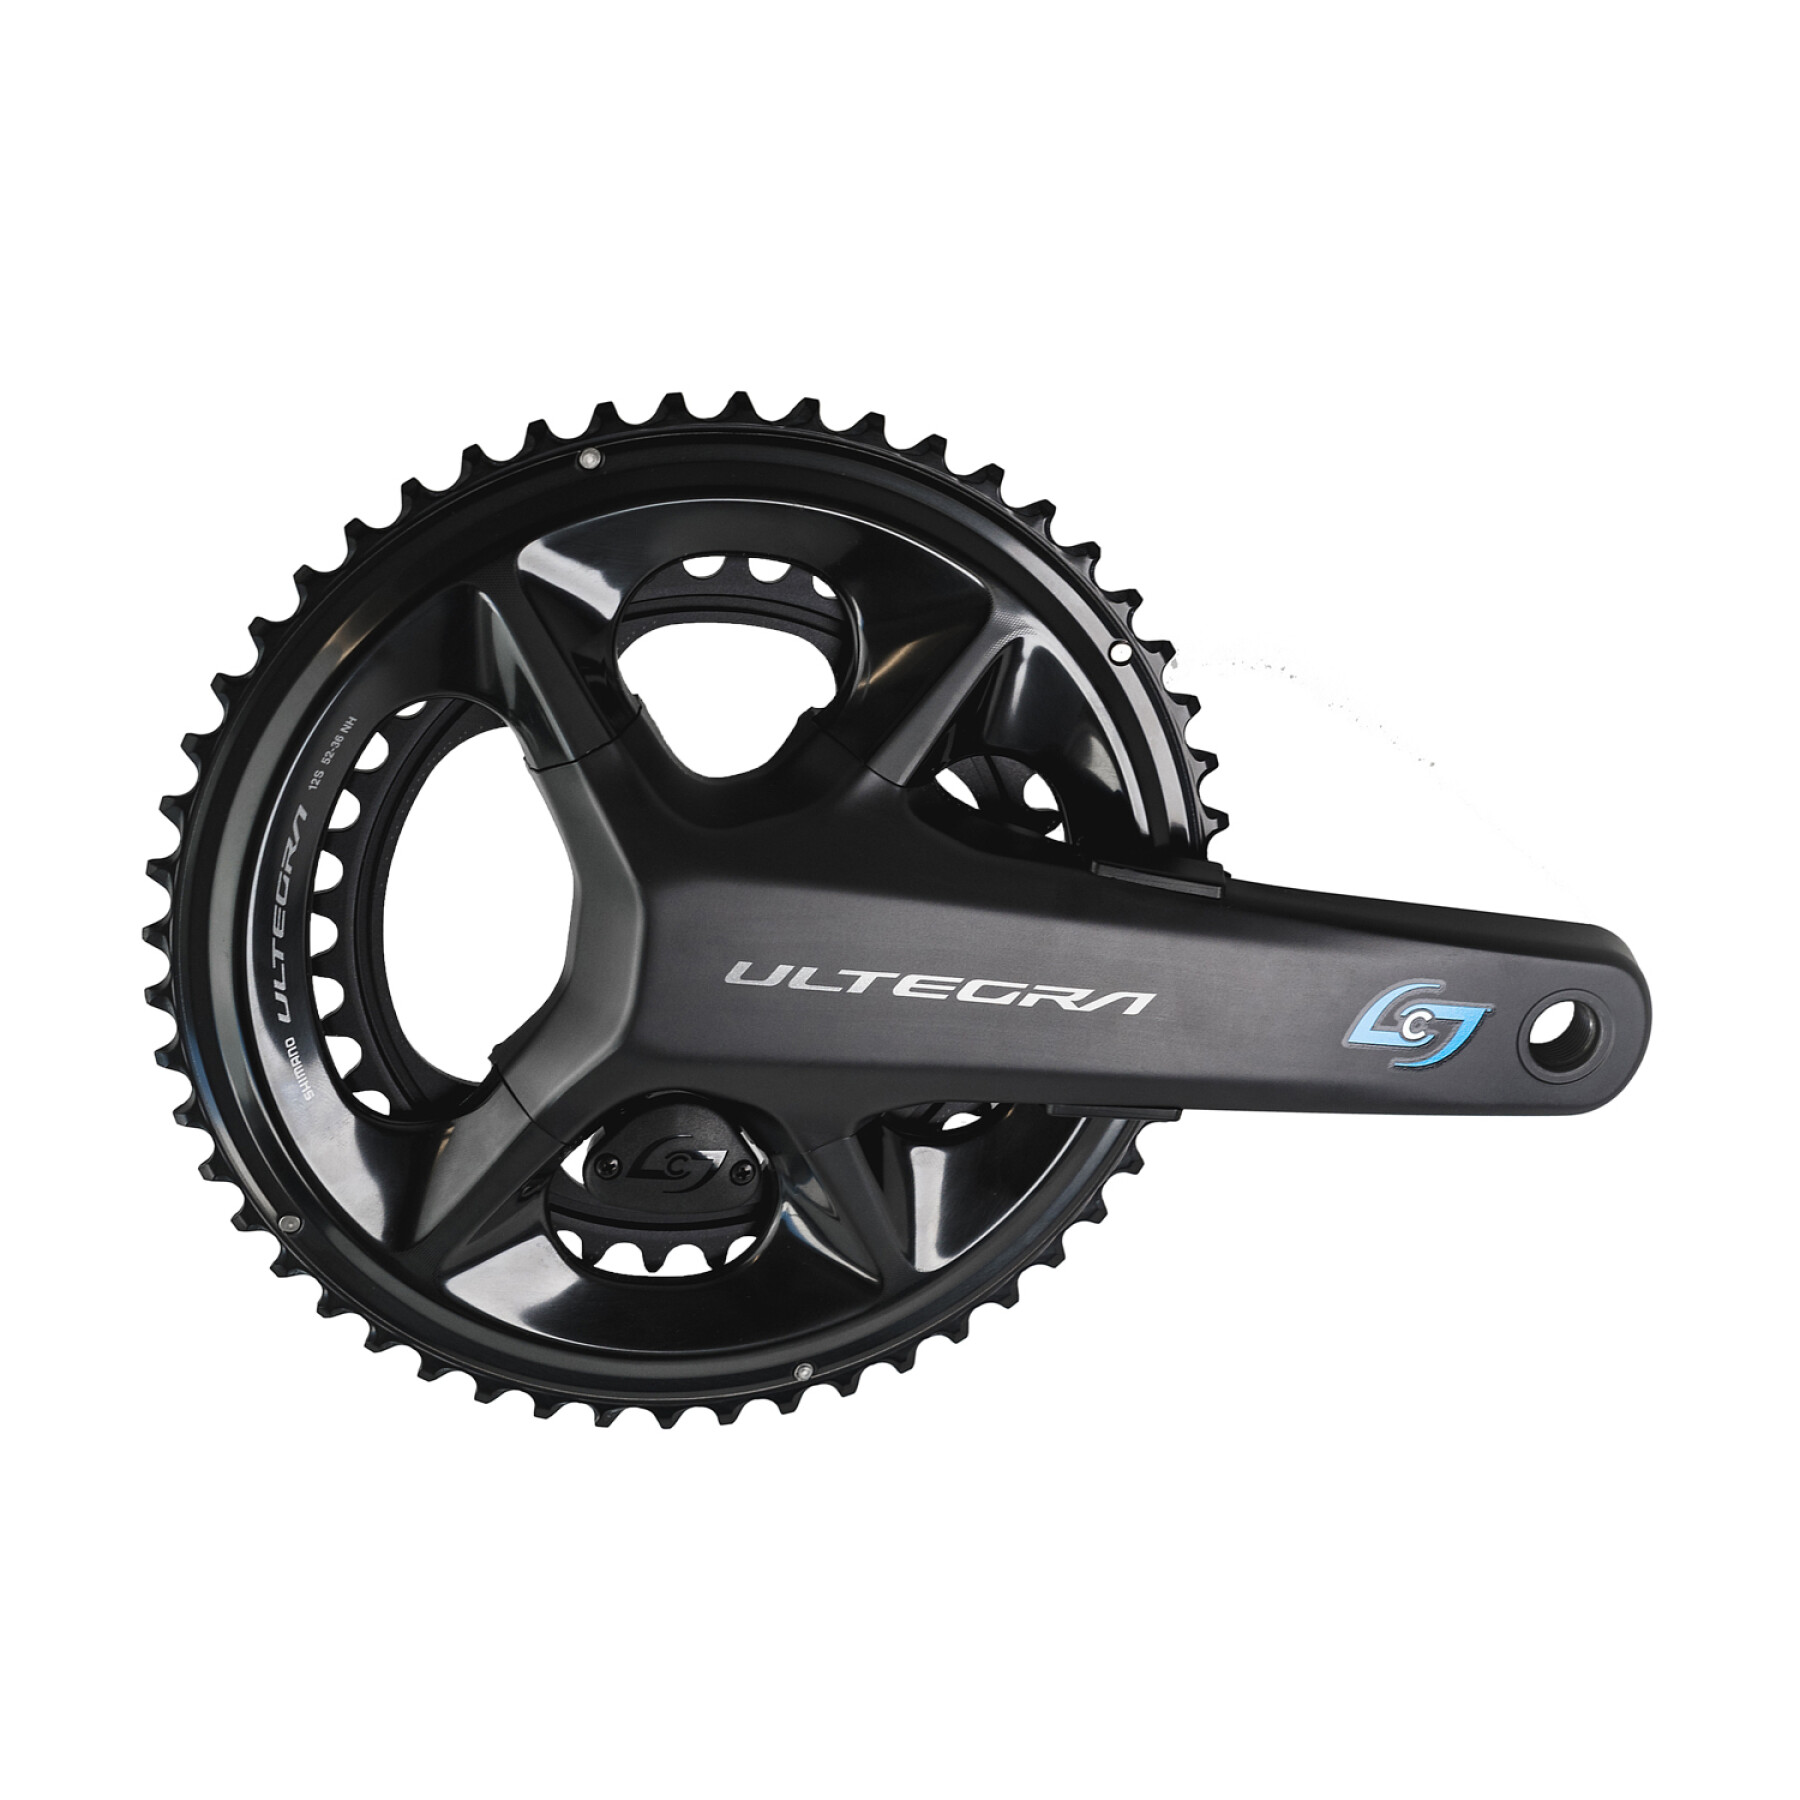 Cranks Stages Cycling Stages Power R - Shimano Ultegra R8000 - 175mn 50/34